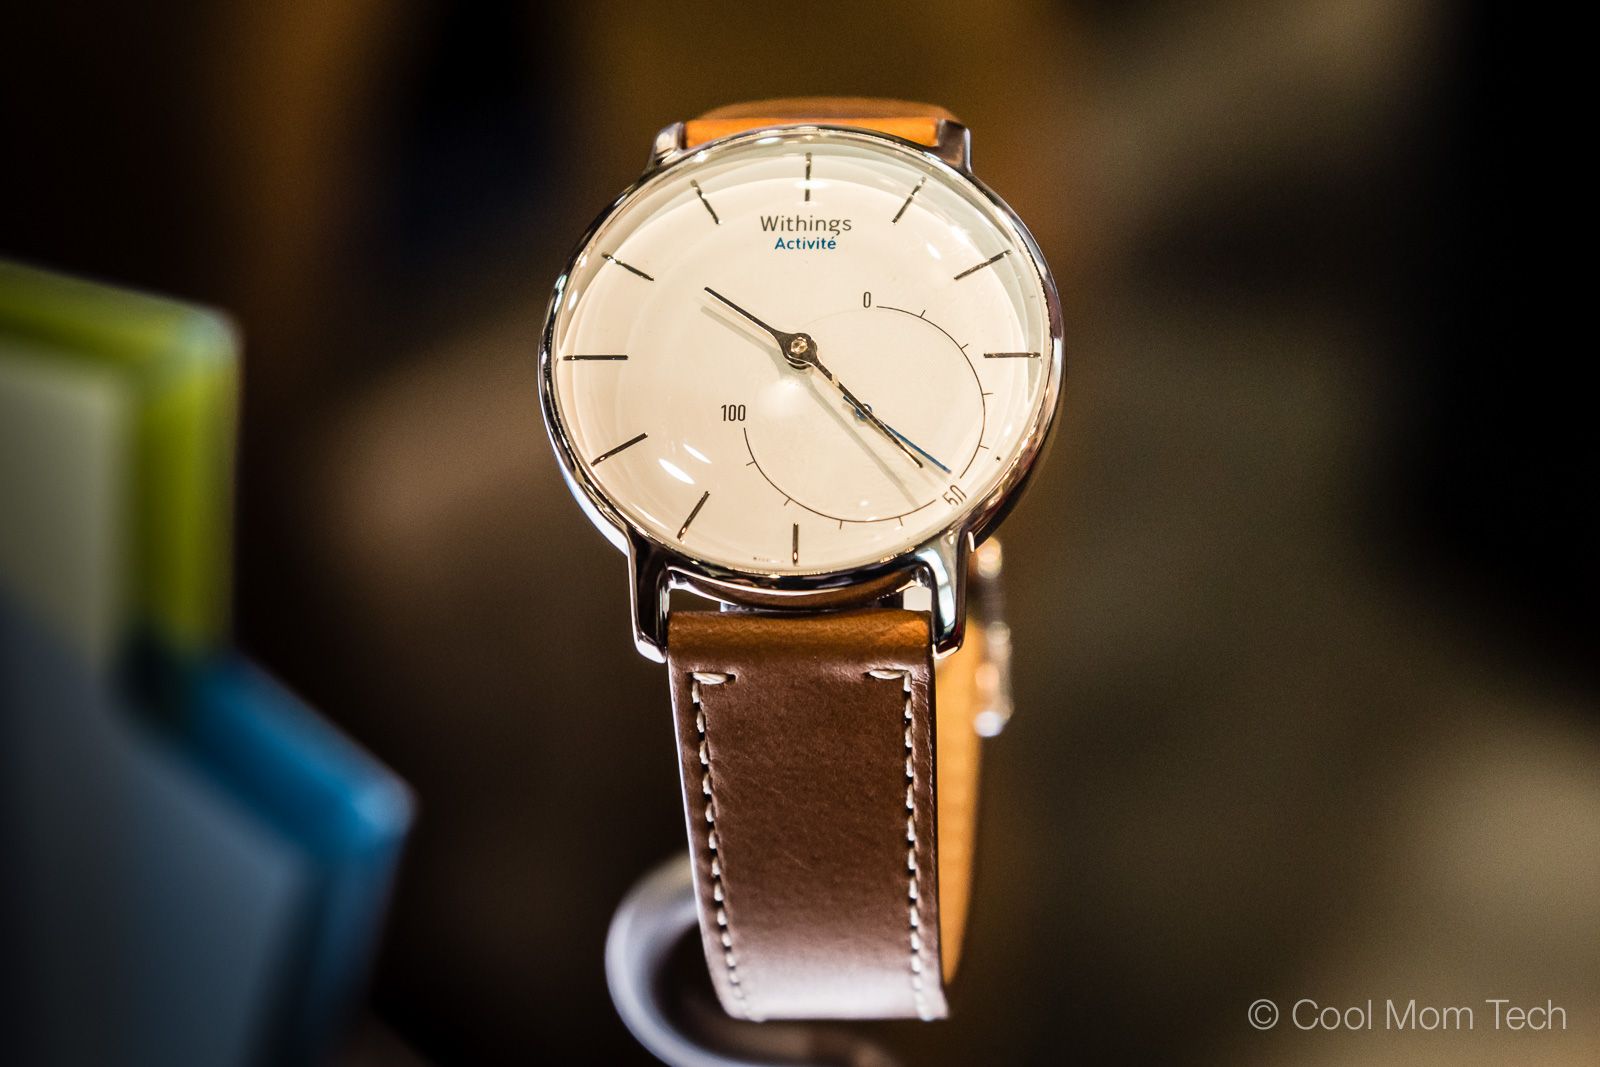 The new Withings Activité is a stunning Swiss-made watch and a fitness tracker